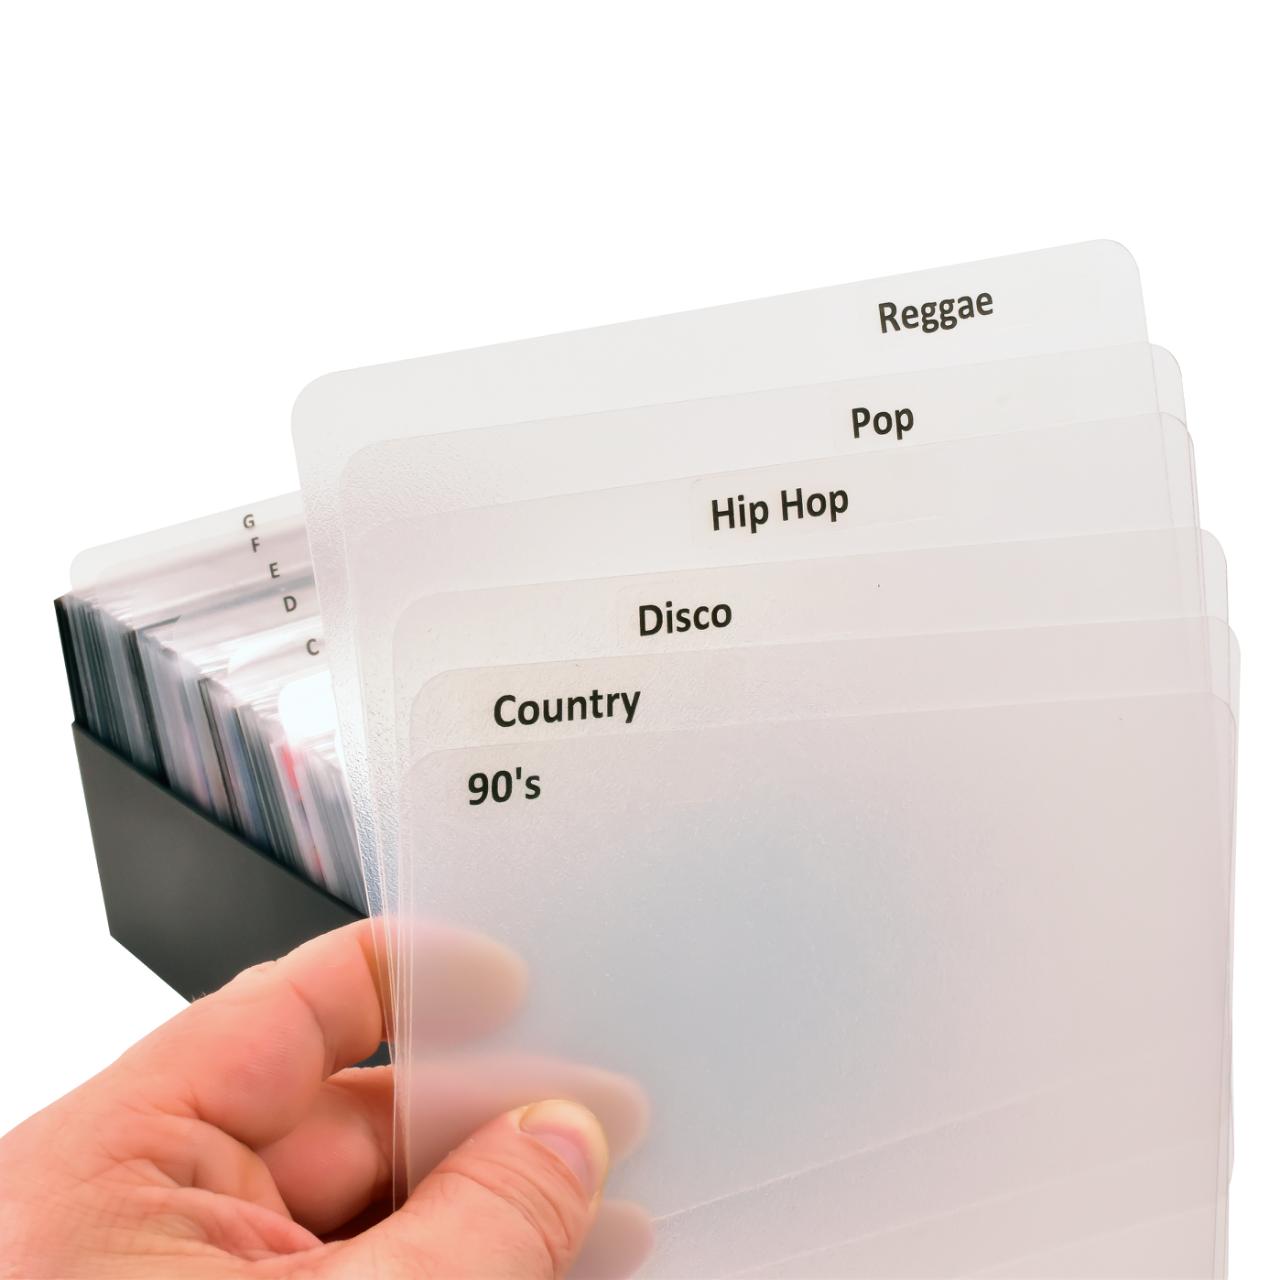 CD Dividers incl. labels with pre-printed film genres